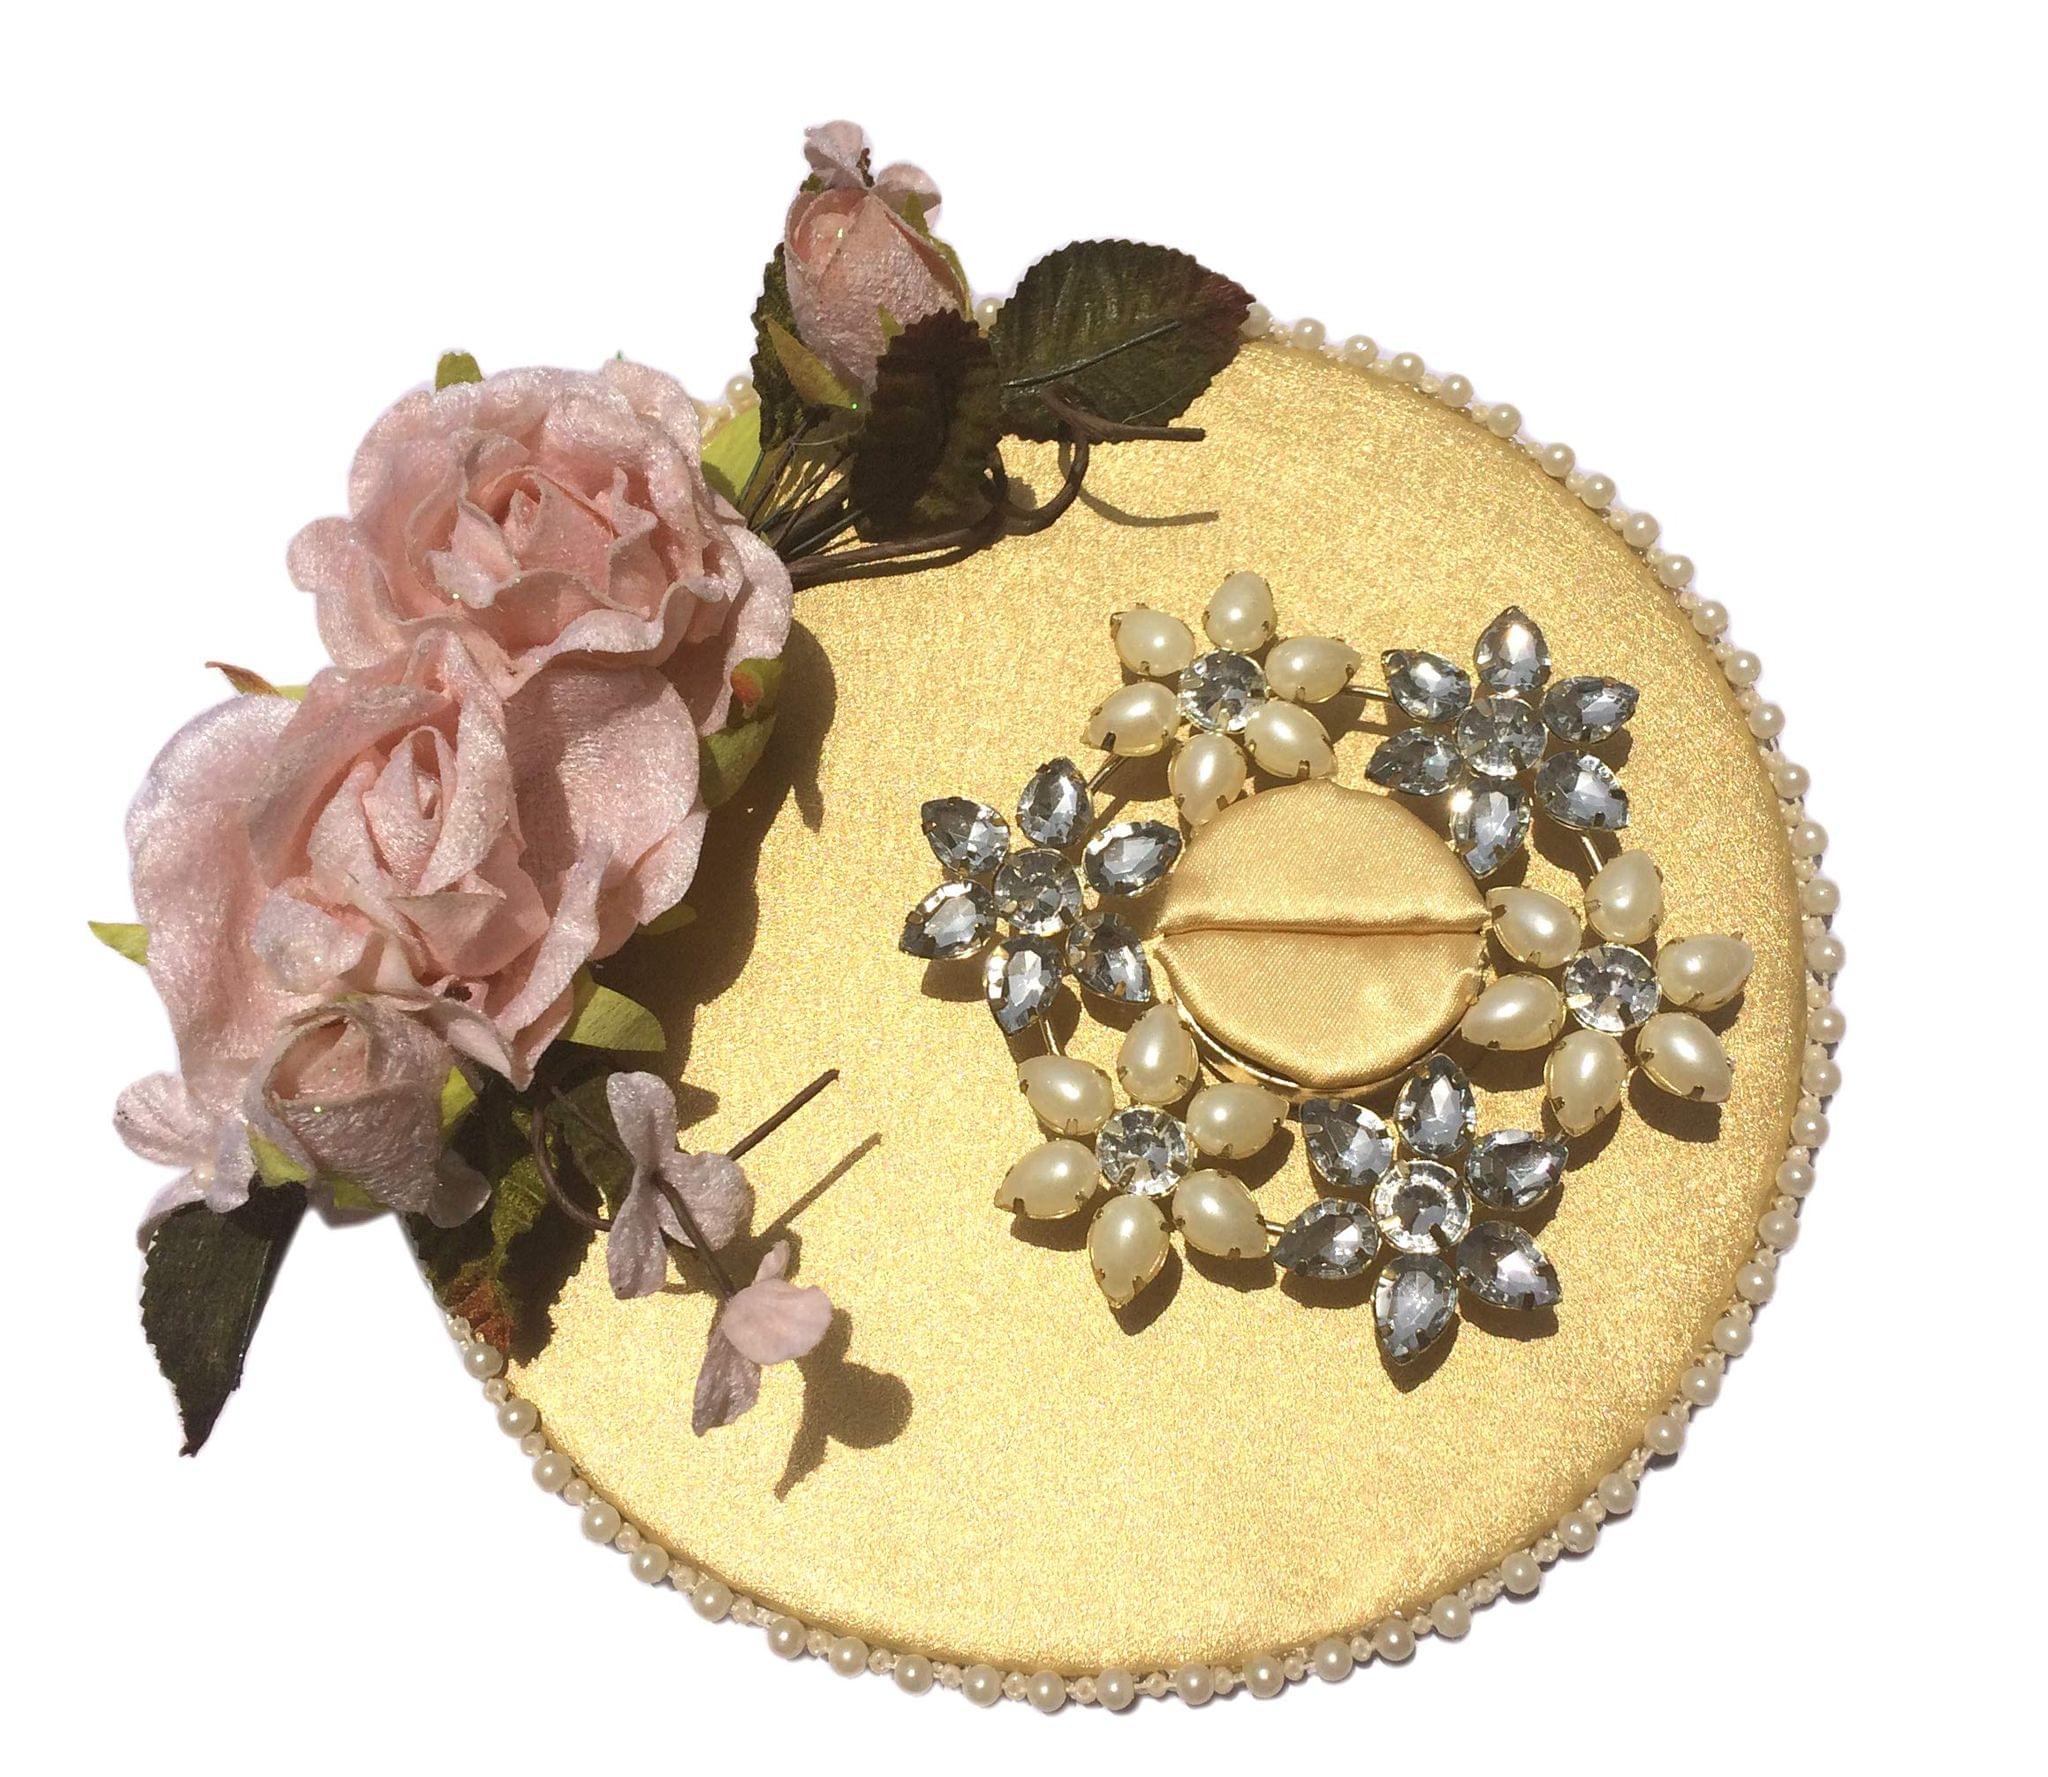 LOOPS N KNOTS Golden Wedding Customised/Ring Platter With 2 Ring Holders  For Wedding Stylish Wedding Ring Platters for a Unique and Elegant  Presentation of Your Rings